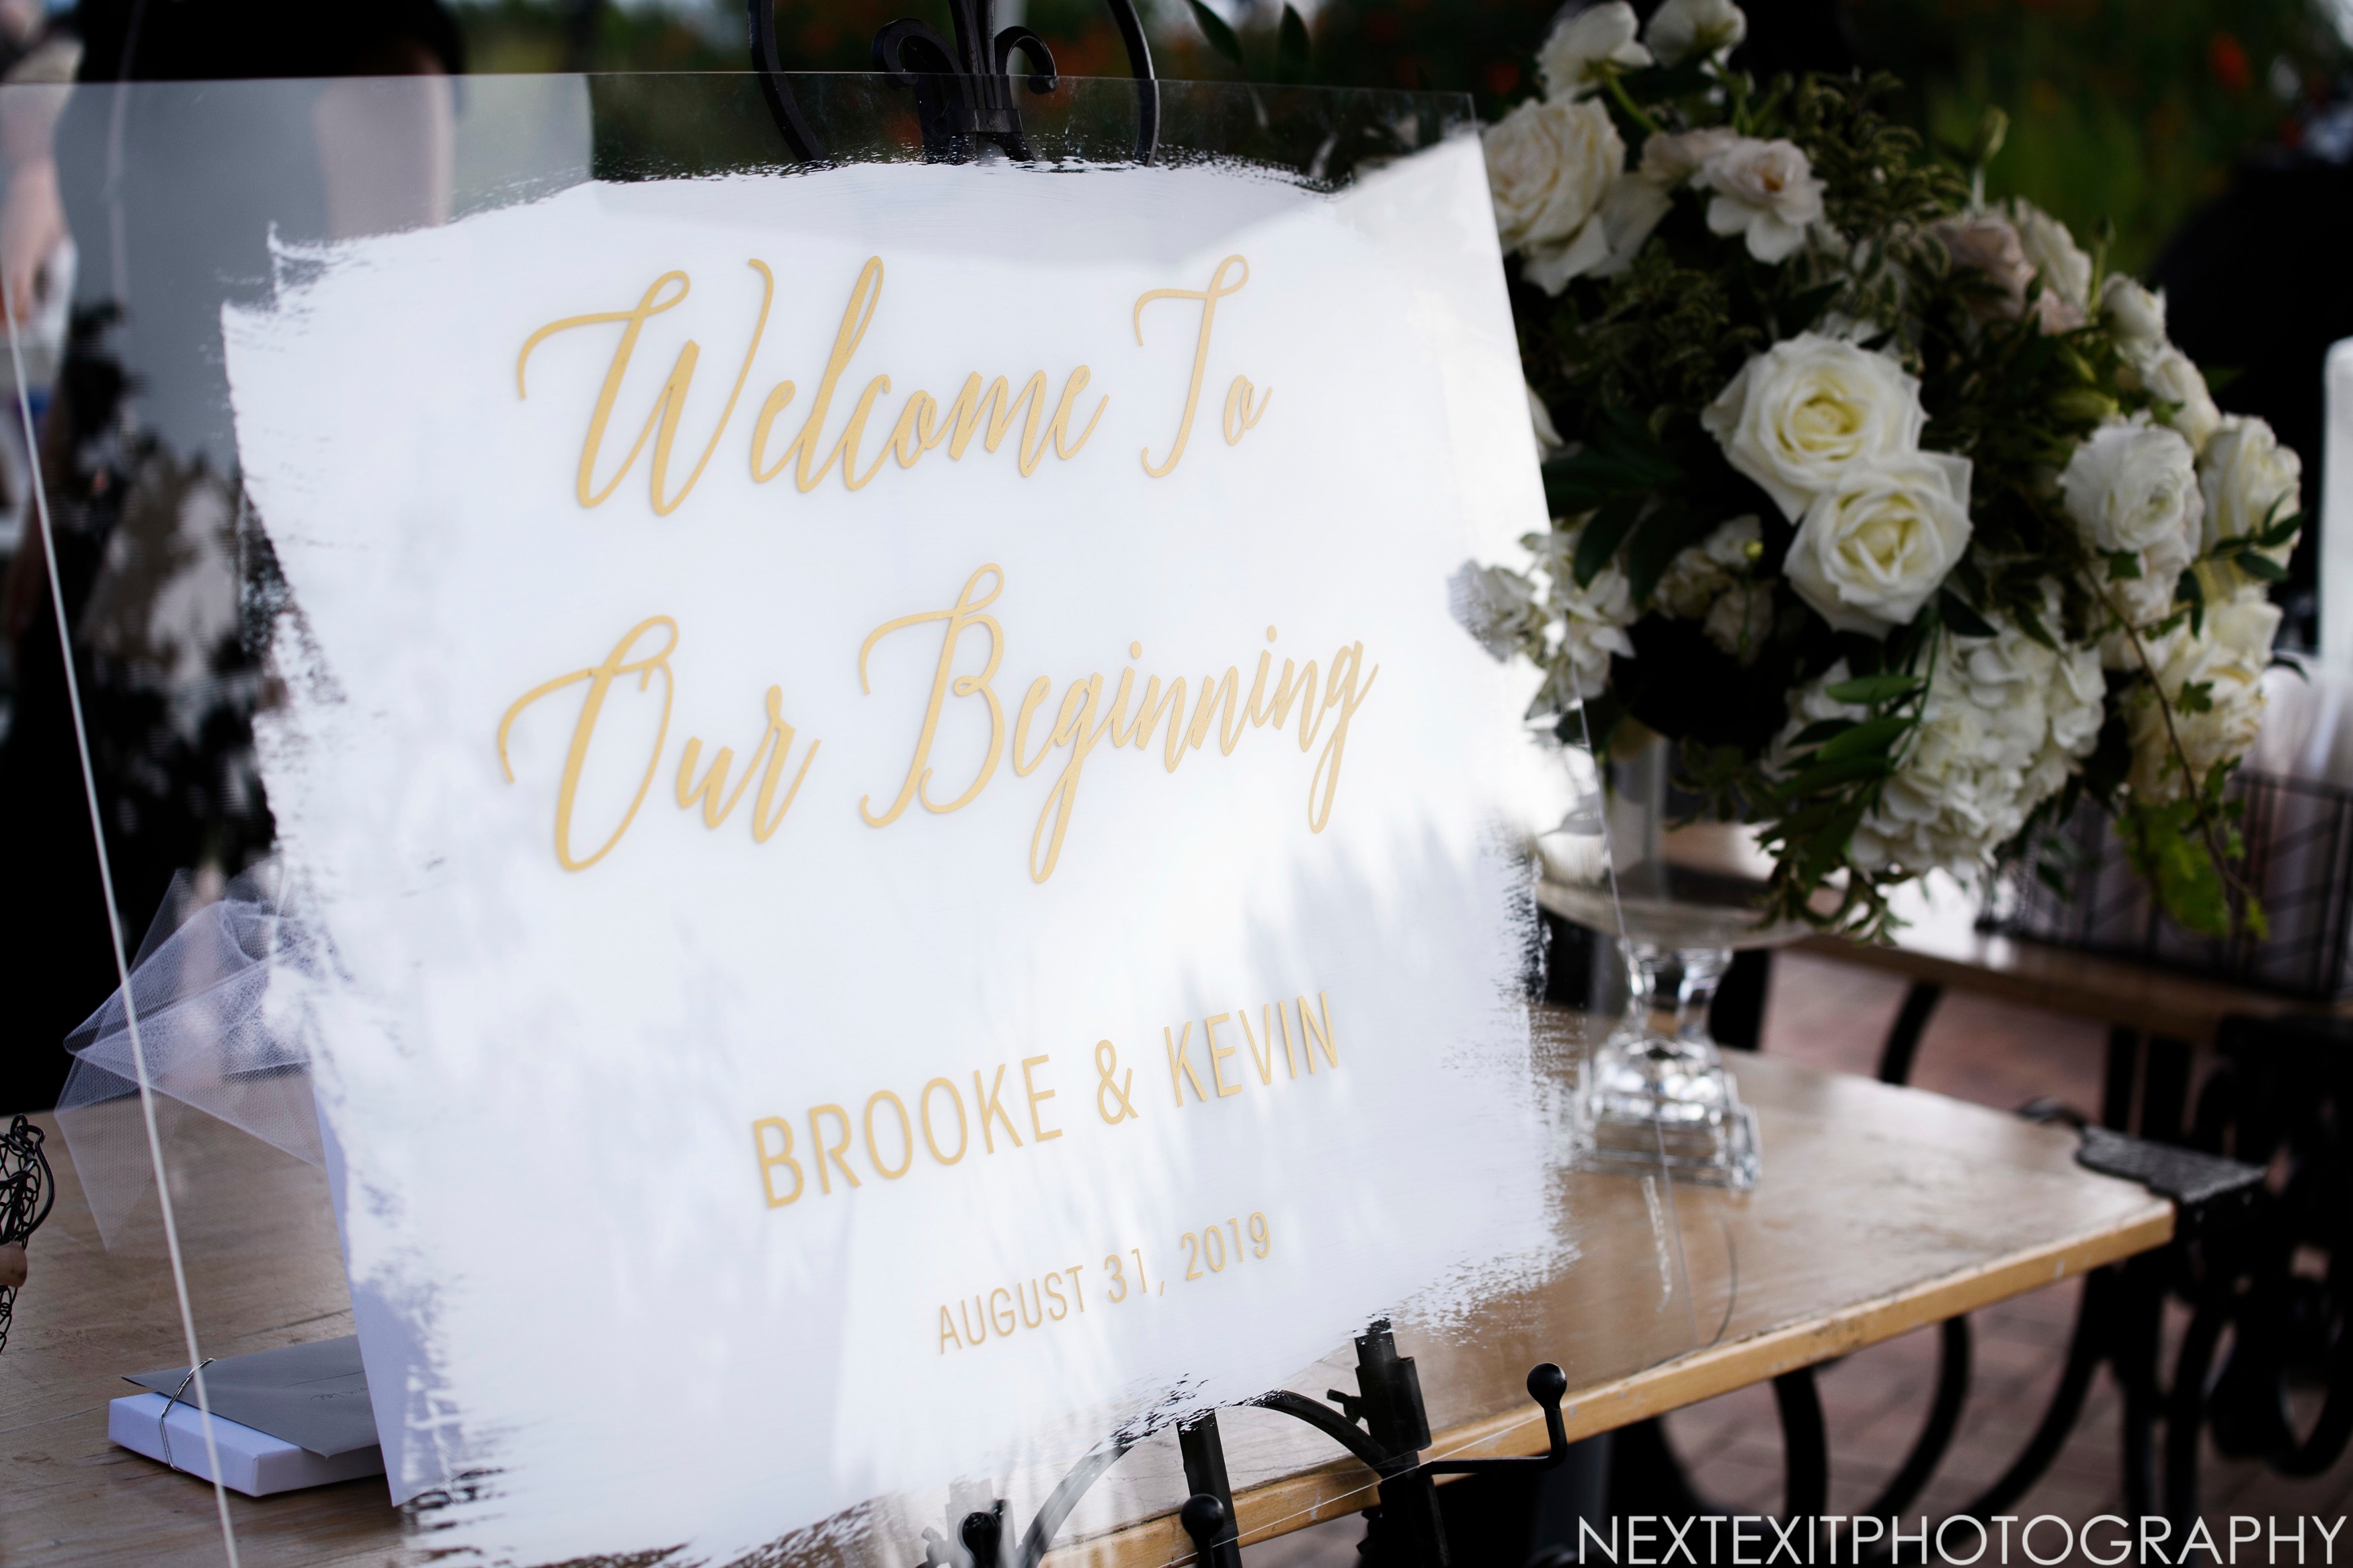 The Wedding of Brooke & Kevin